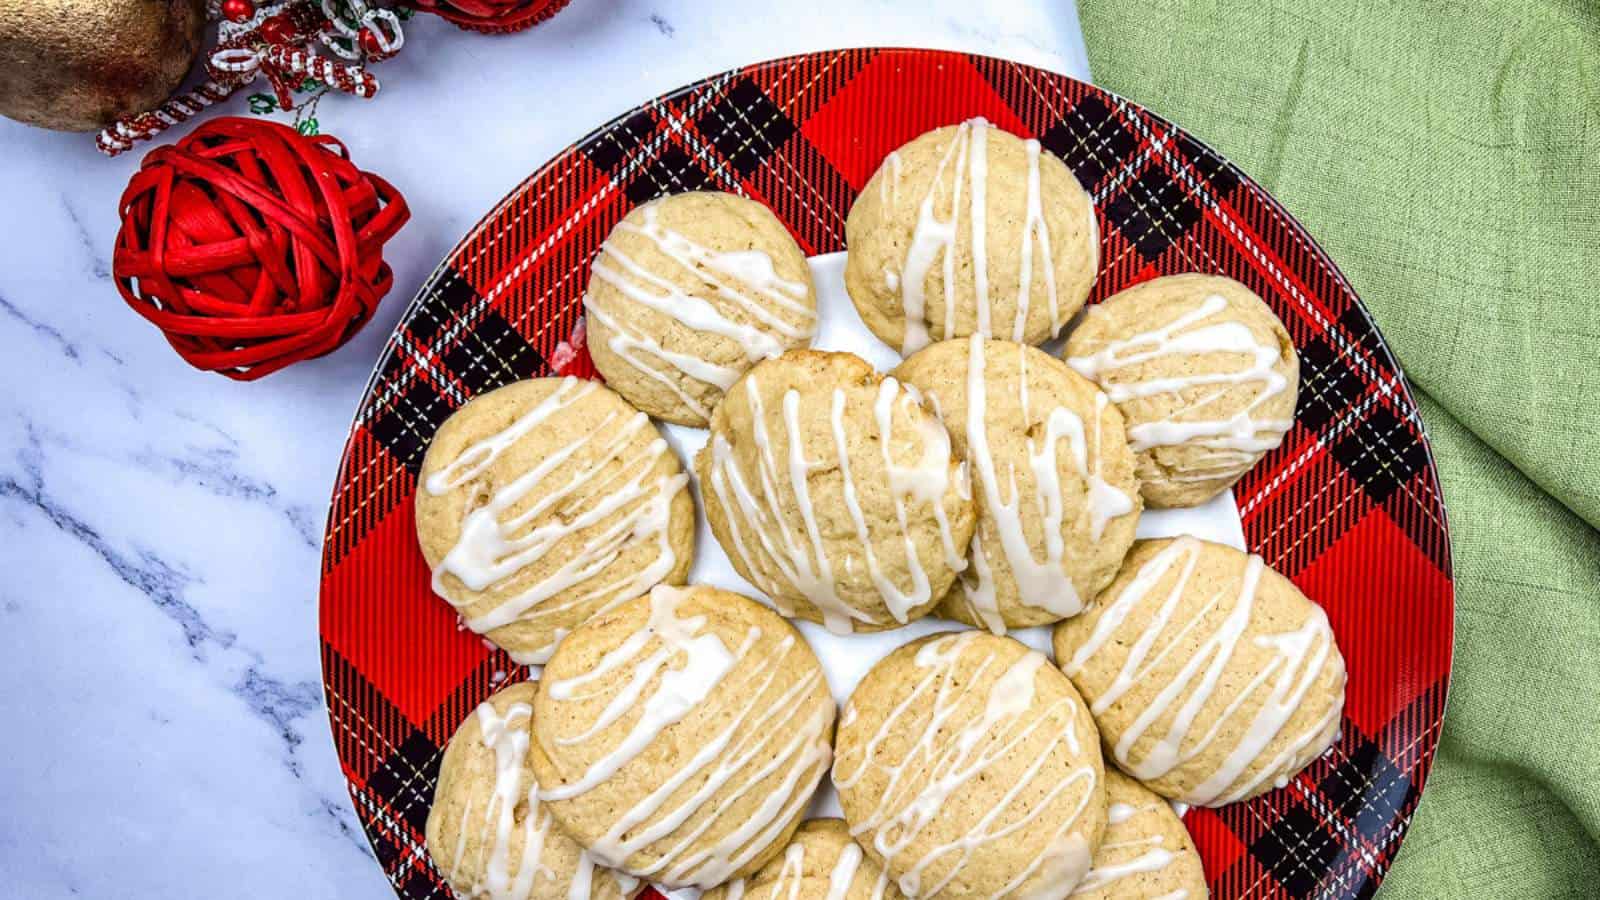 A plate of eggnog cookies with with spiced rum glaze on top.